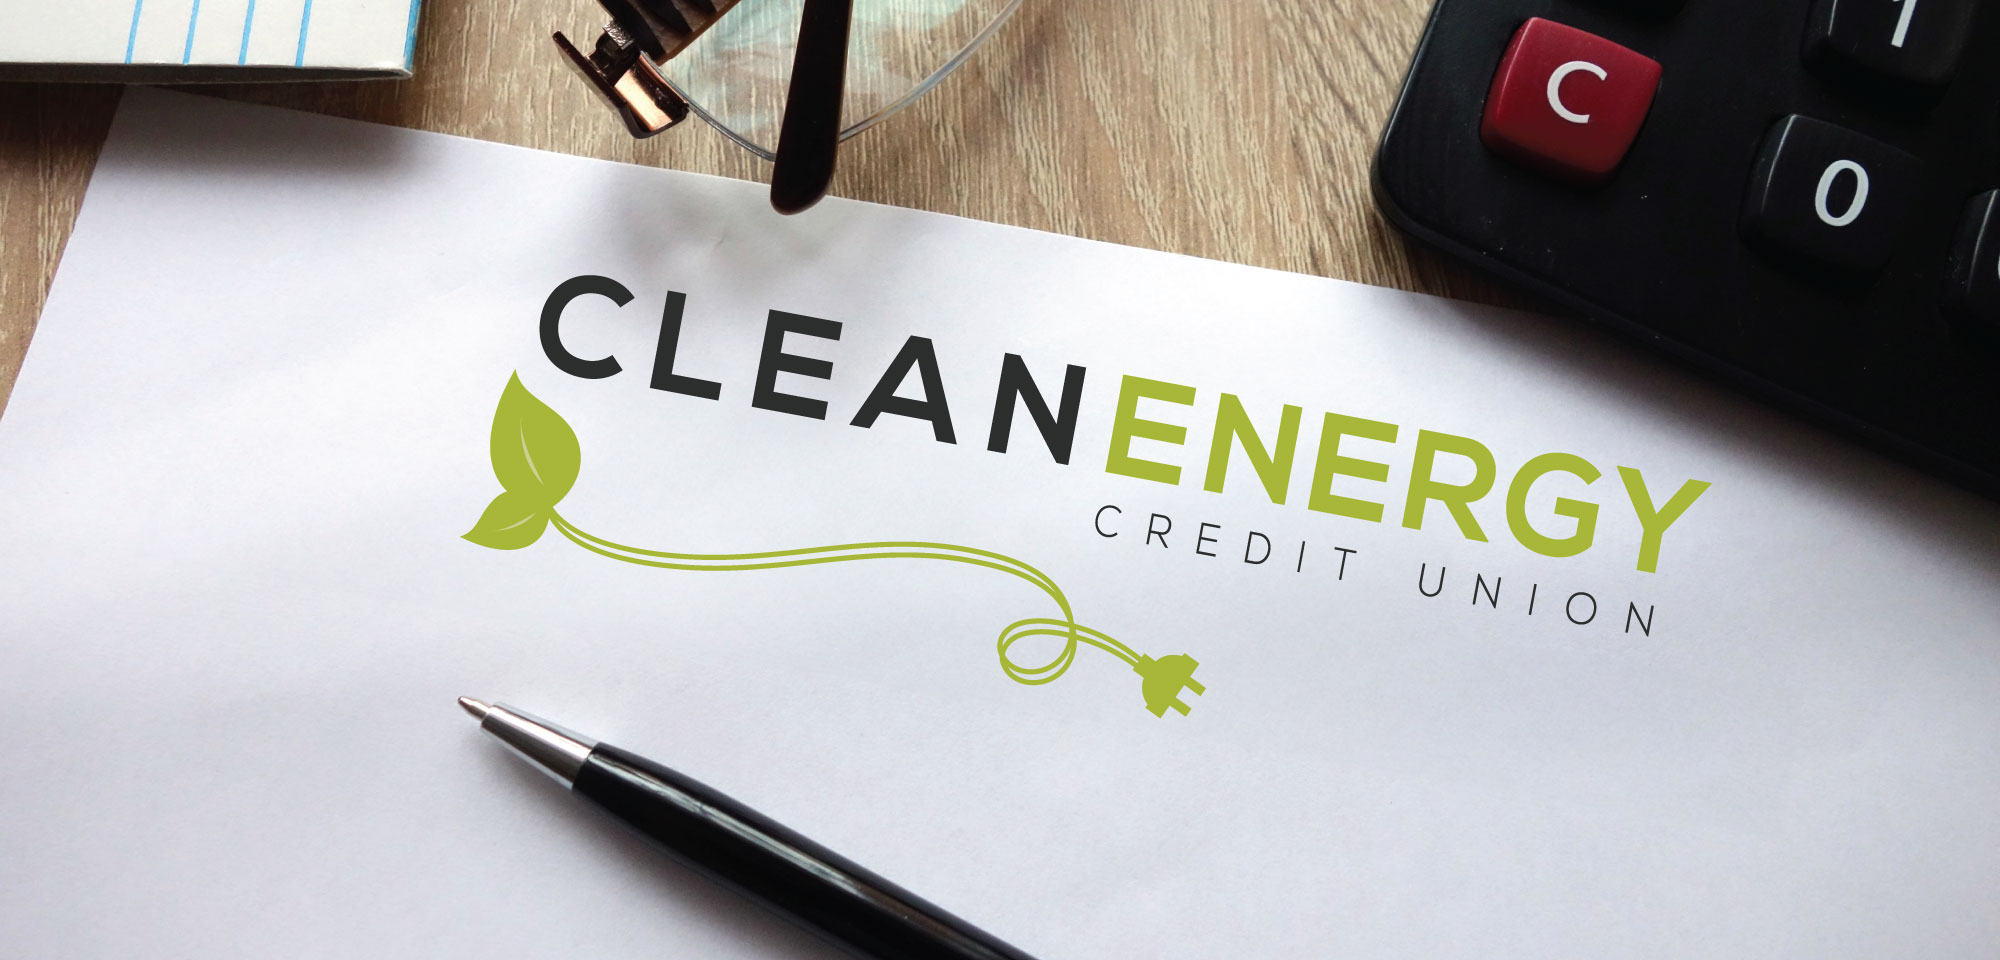 Financing with Clean Energy Credit Union: are they right for you?